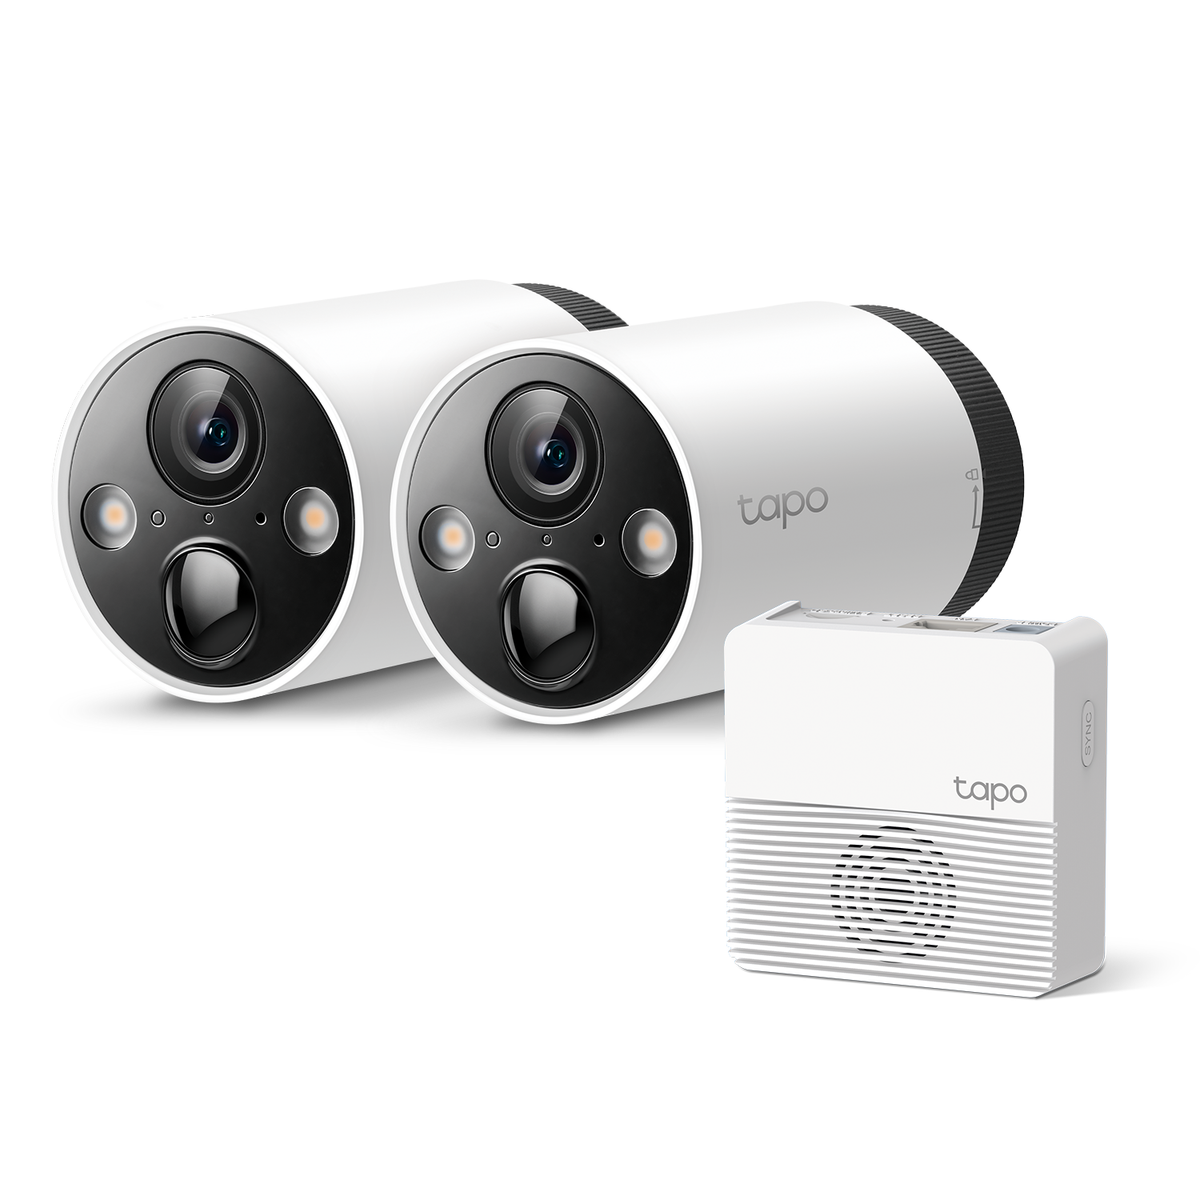  TP-Link Tapo 2K QHD Security Camera, Indoor/Outdoor, 𝟮𝟬𝟮𝟰  𝗣𝗖𝗠𝗮𝗴 𝗘𝗱𝗶𝘁𝗼𝗿'𝘀 𝗖𝗵𝗼𝗶𝗰𝗲, Color Night Vision, Free  Person/Pet/Vehicle Detection, Invisible IR Mode, SD Storage(Tapo C120) :  Electronics